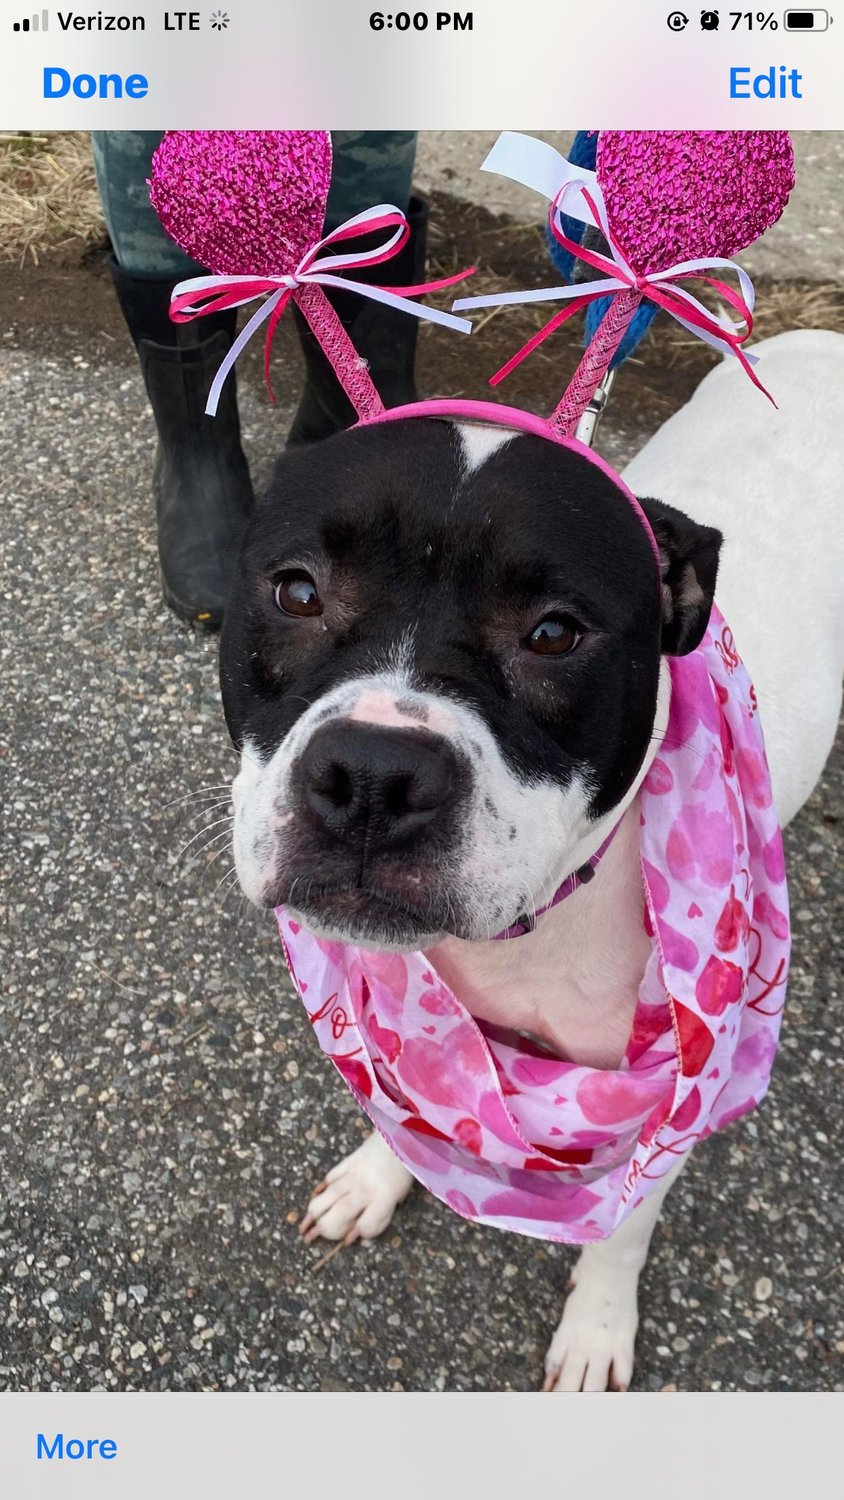 Bonnie
Gender: female
Breed: mix
Color: black and white 
Bonnie is a 3-year-old female spayed pittie mix. She was rescued from a neglectful situation. She is a cuddle bug, prefers to be the only pet in the home, and good with kids 10 and up.